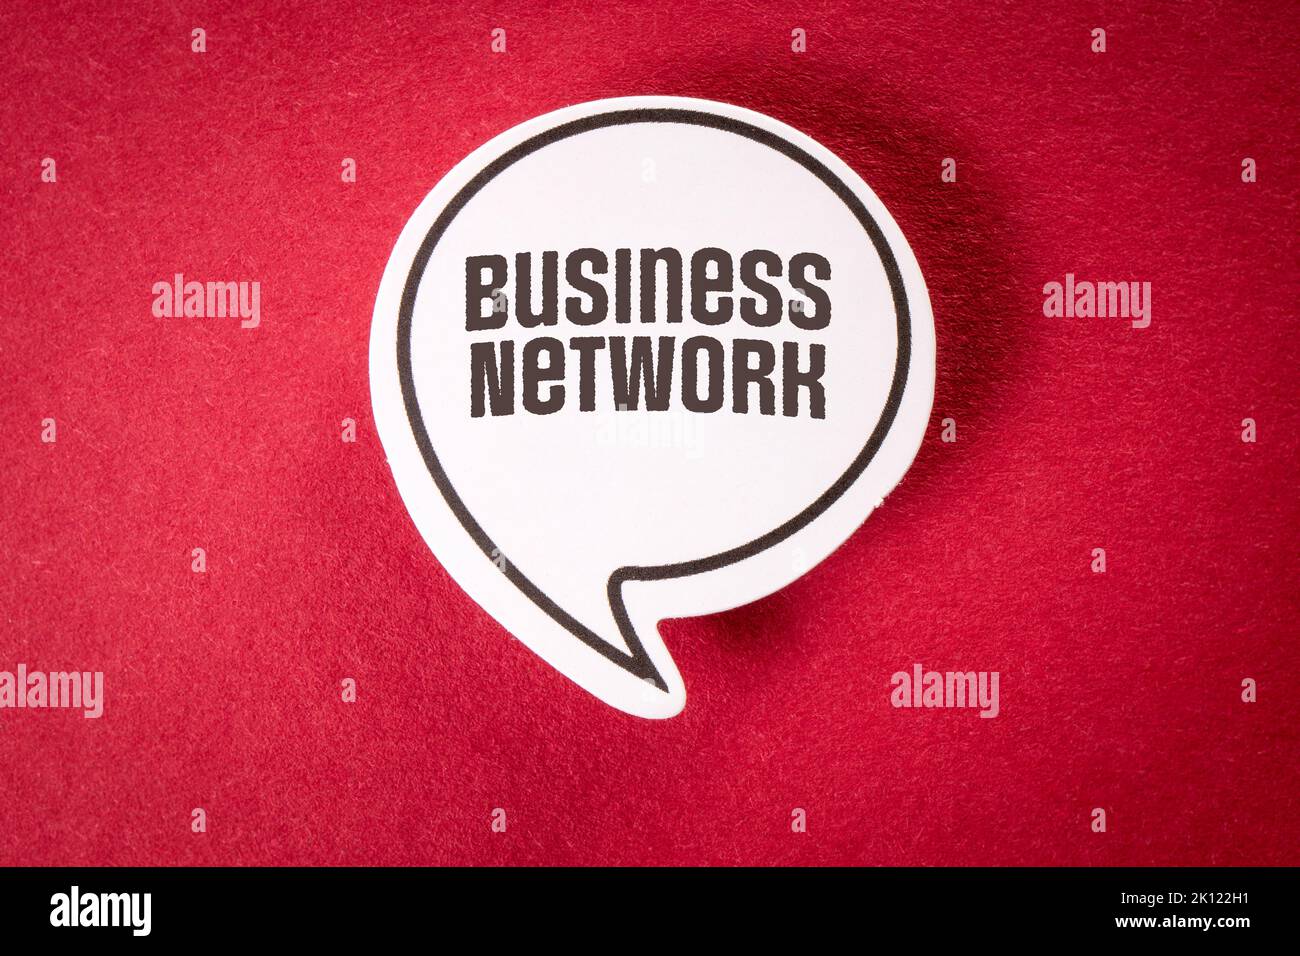 Business Network. Speech bubble with text on red background. Stock Photo